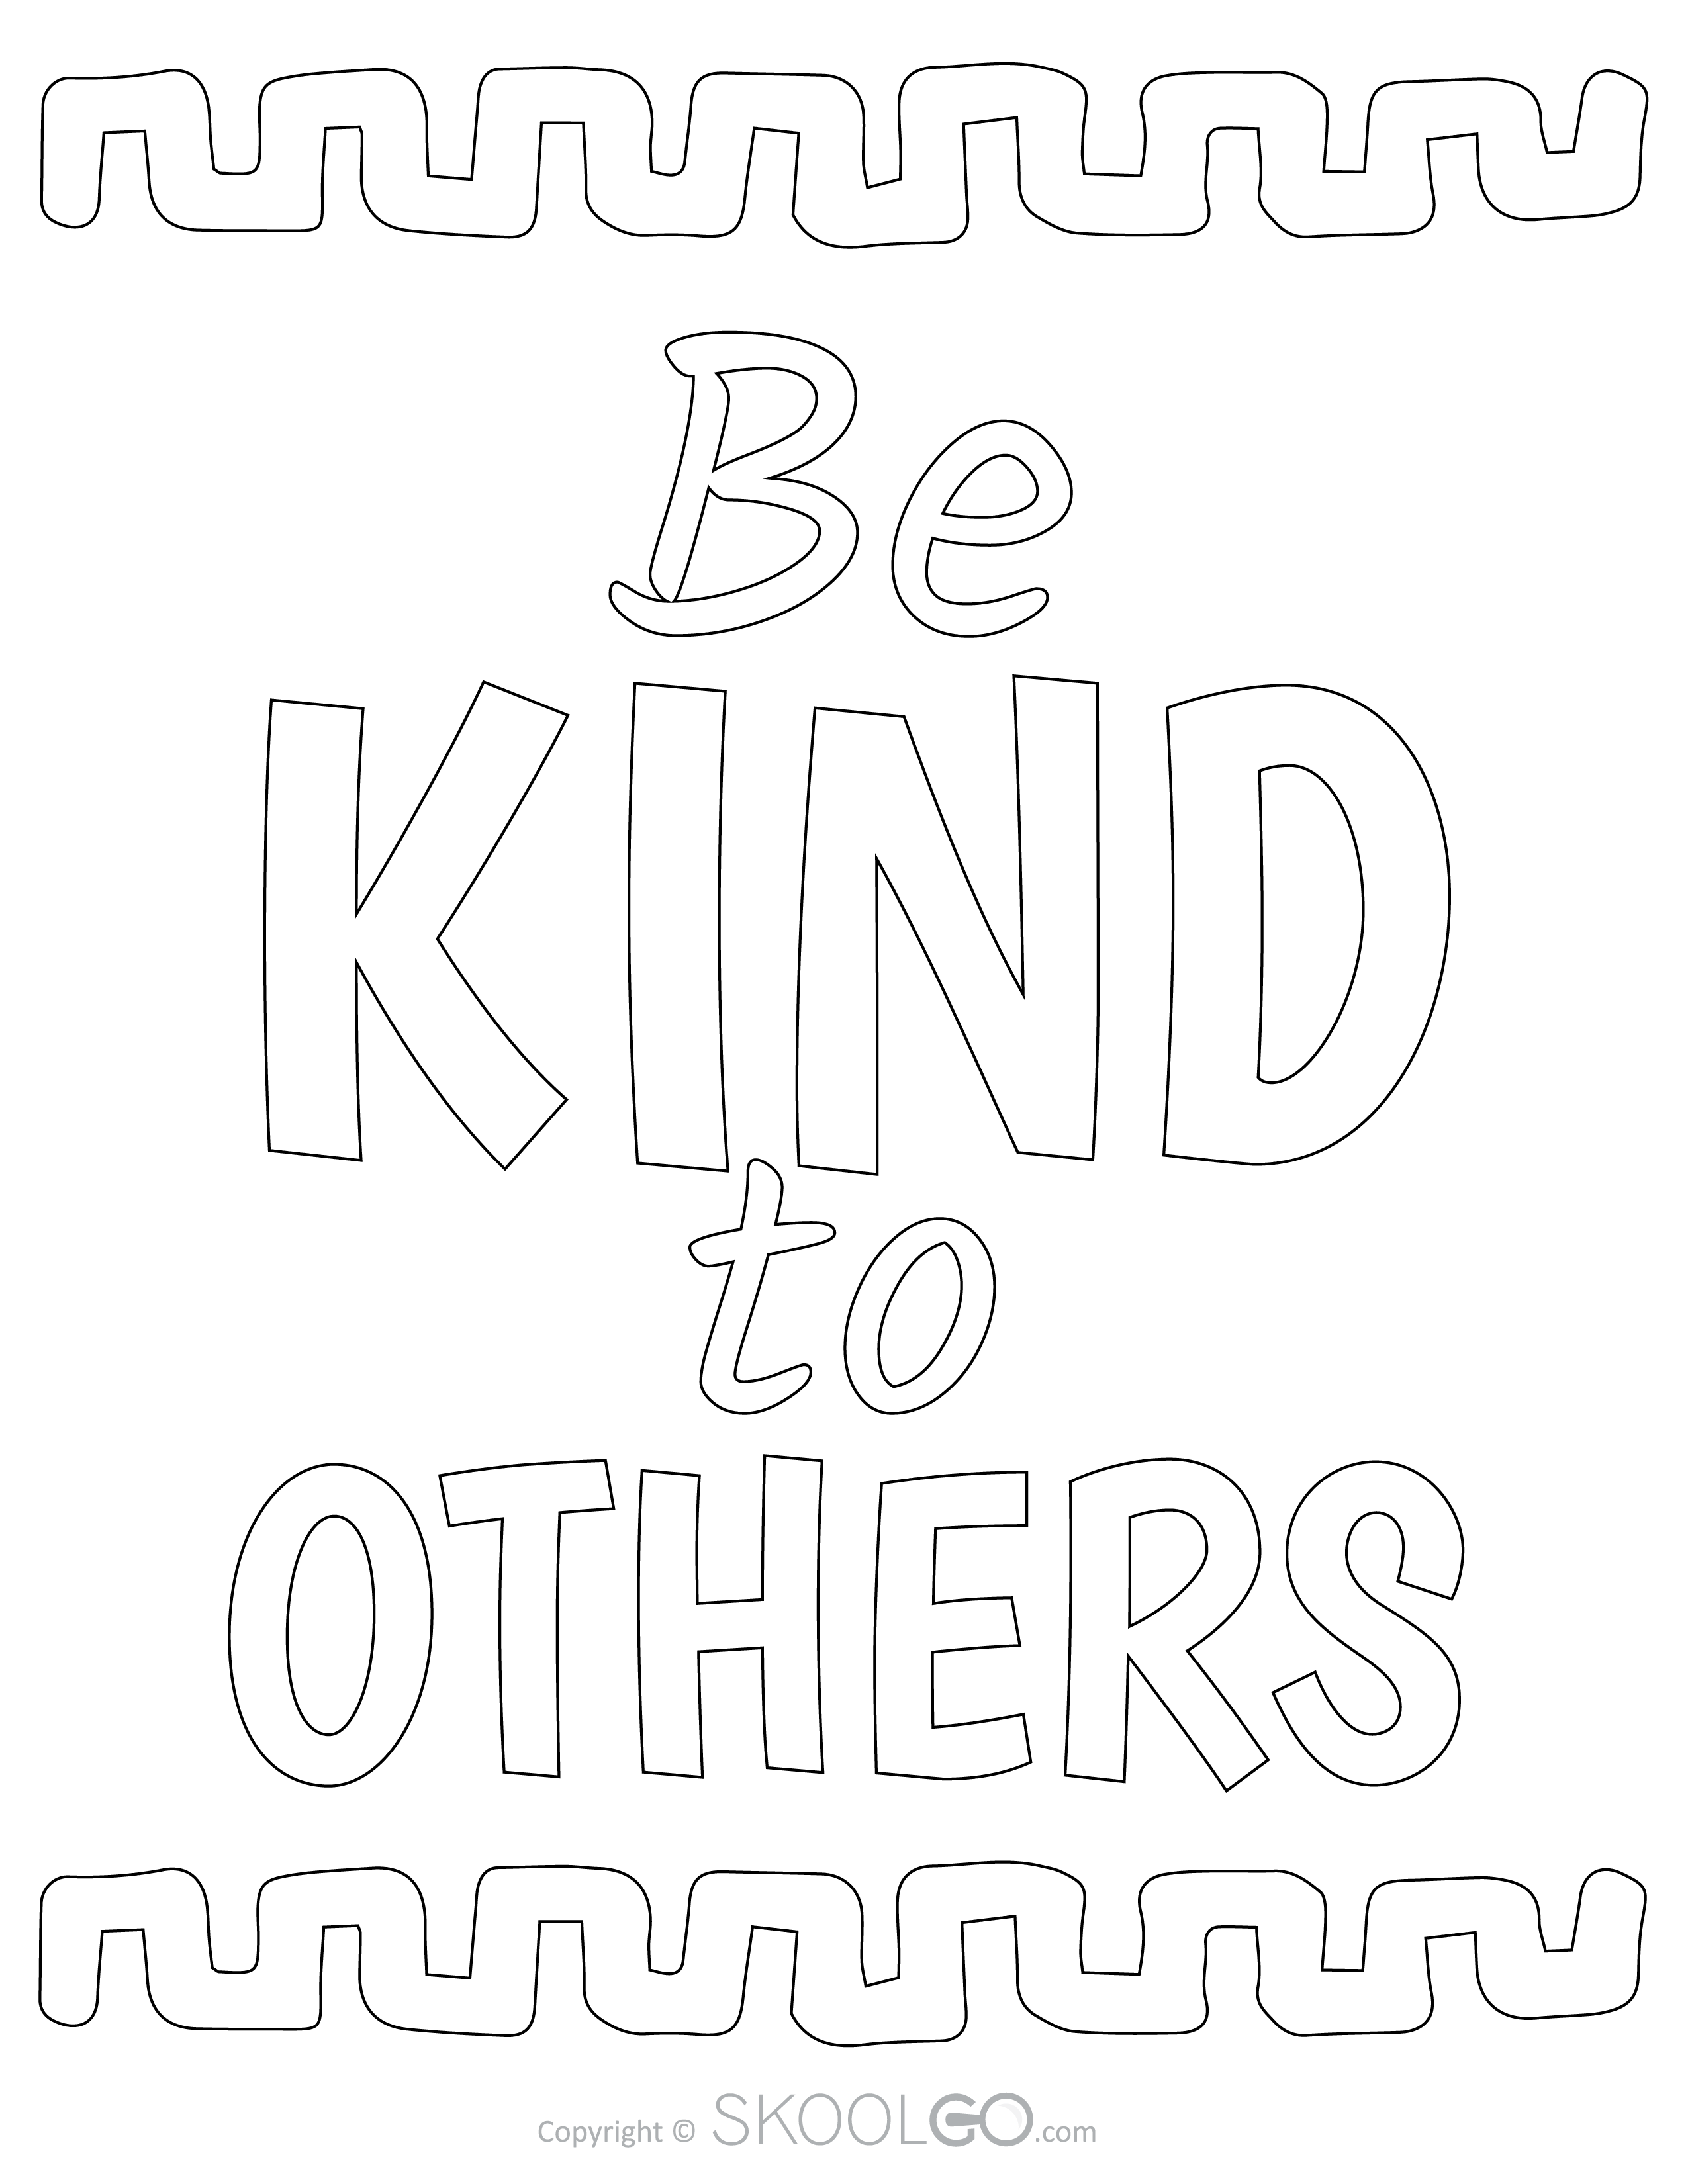 Be Kind To Others - Free Coloring Version Poster